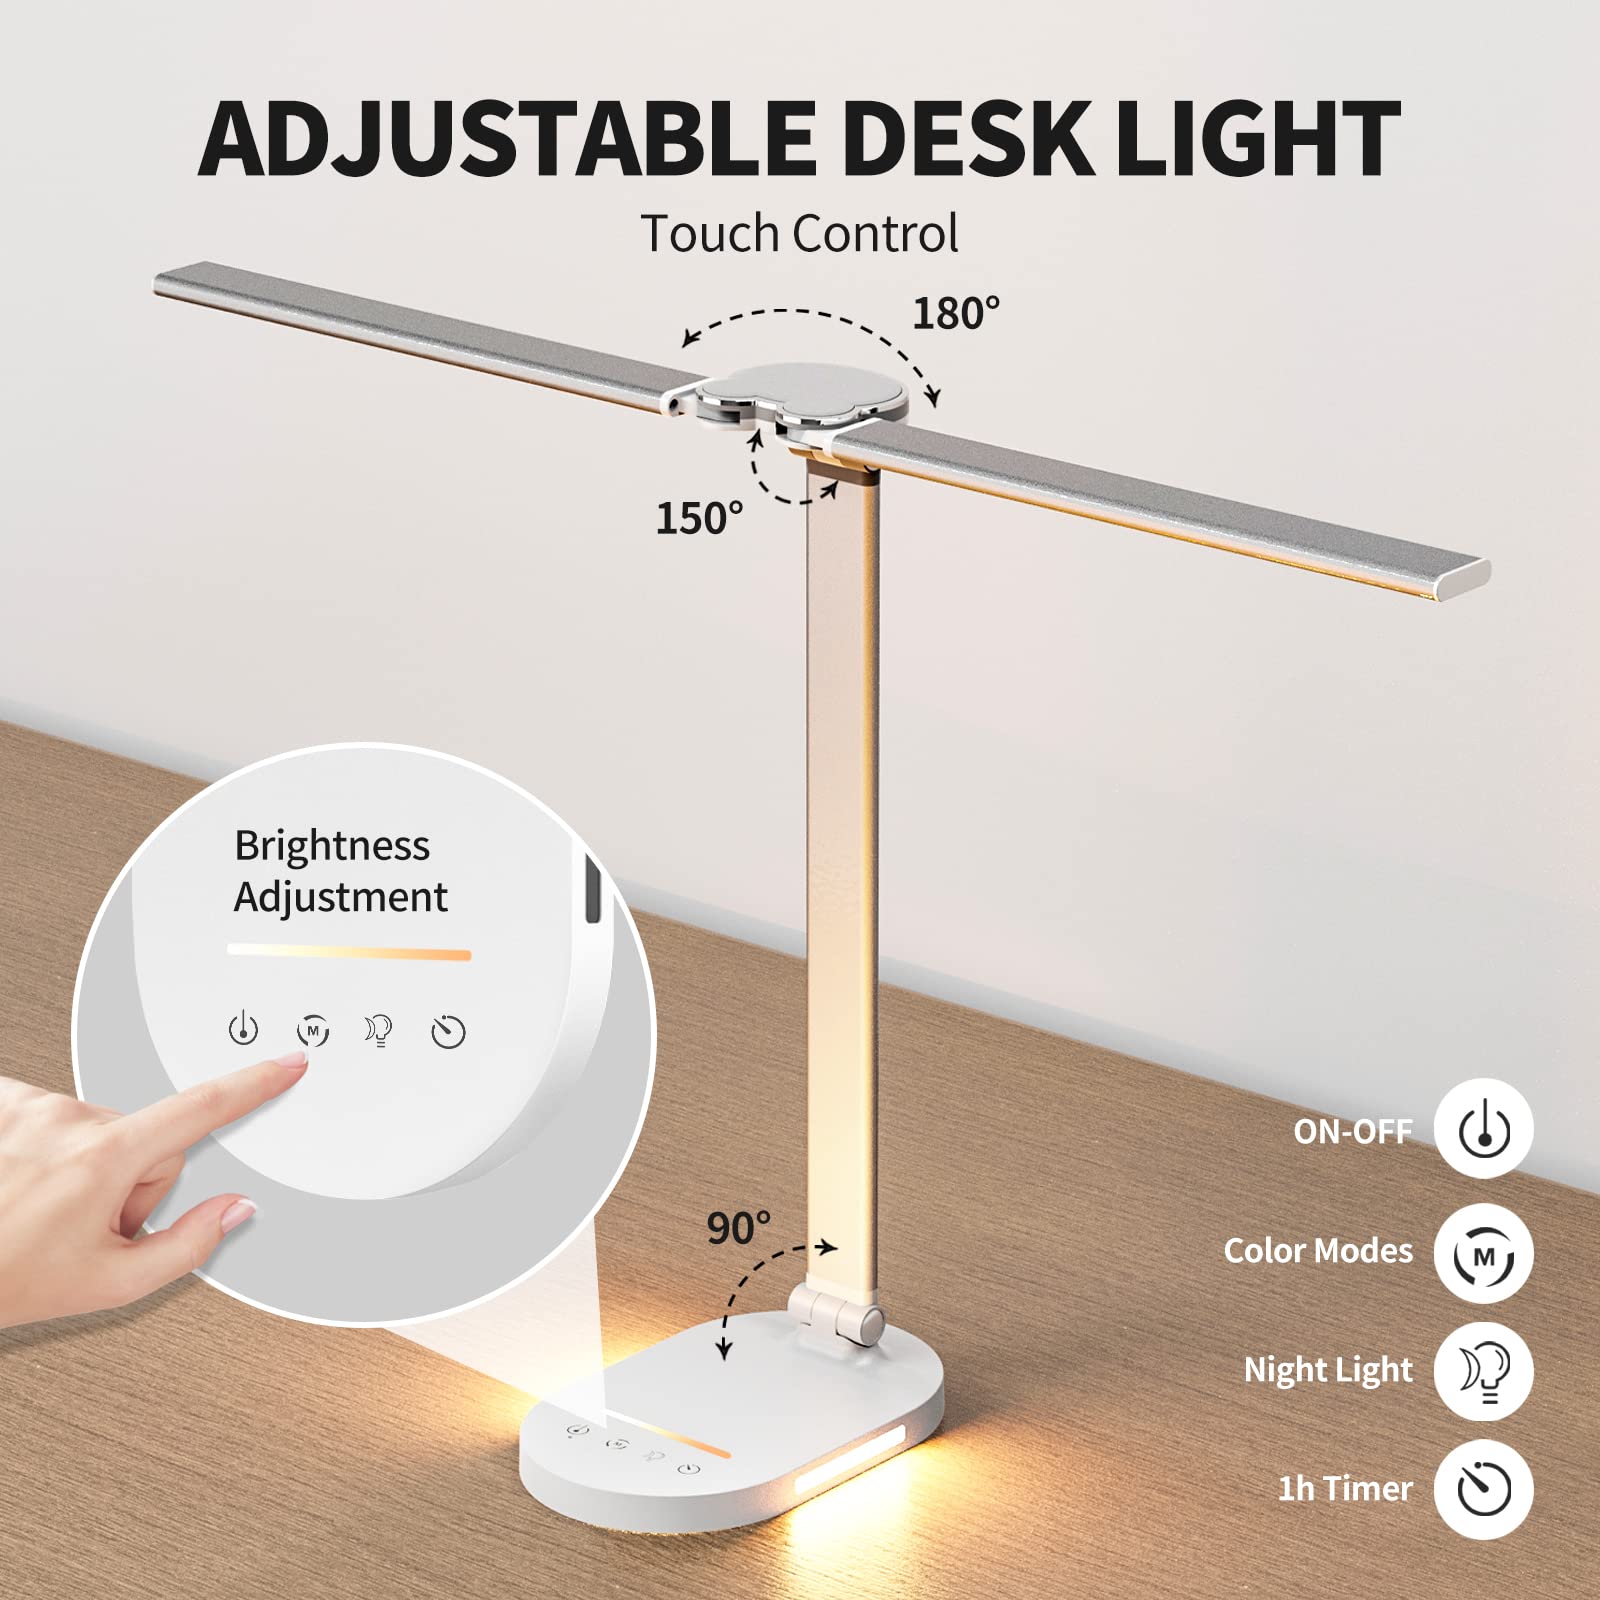 Double Head Desk Lamp for Home Office, Eye-Care Desk Light with USB Charging Port, Touch Control 5 Color Temperature & Brightness with Night Light Mode, 60min Timer Desktop Table Lamp for College Dorm